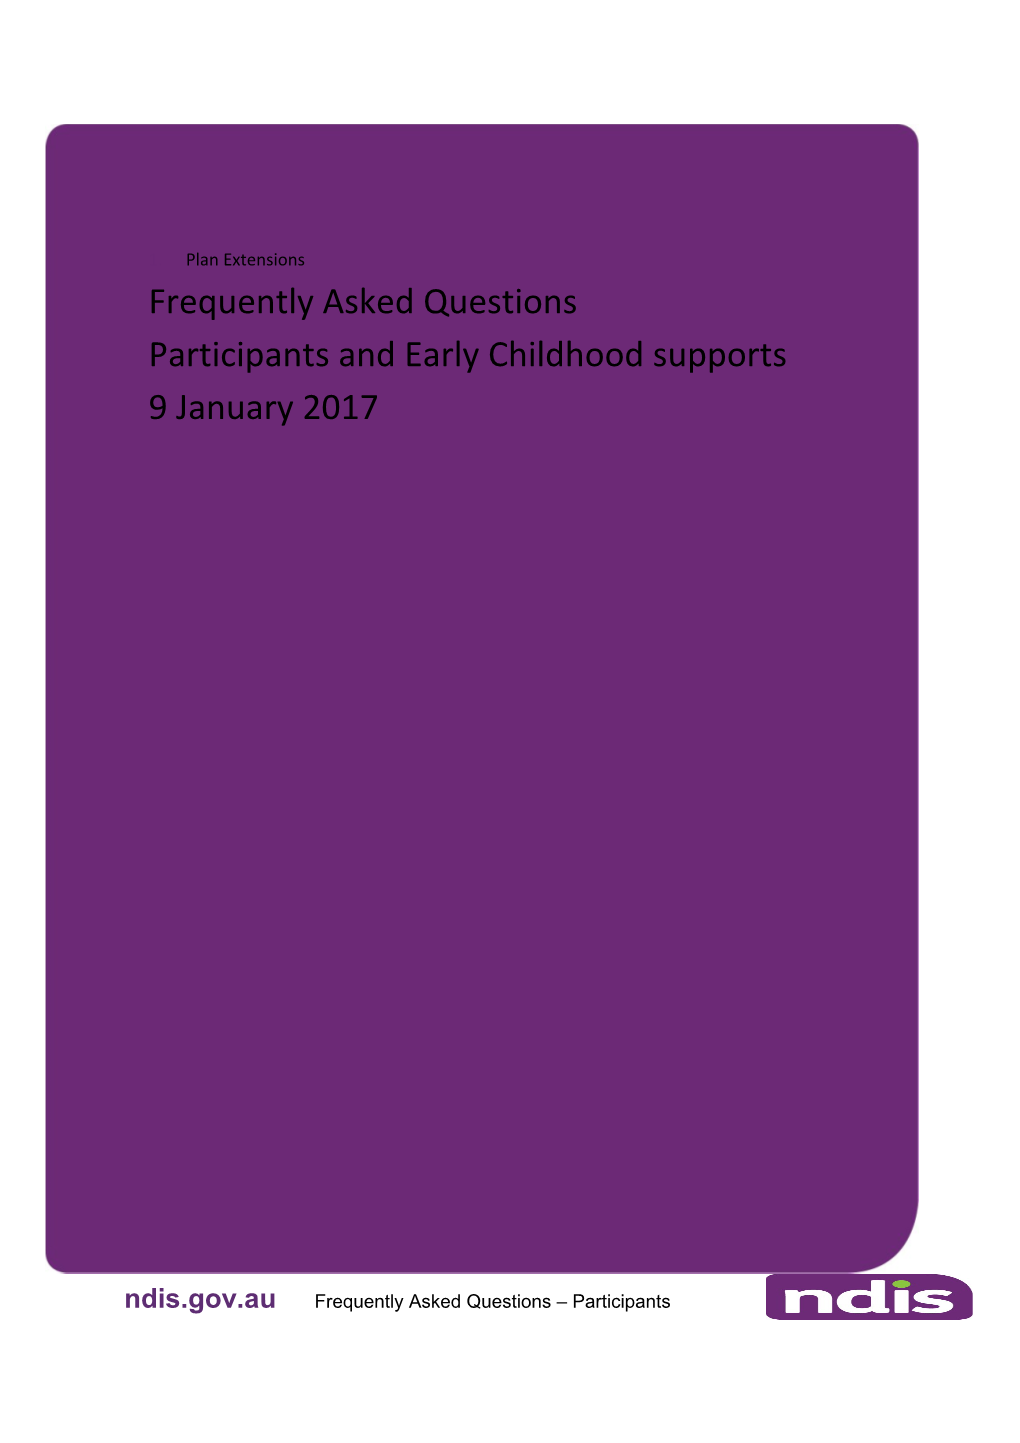 Plan Extensionsfrequently Asked Questions Participants and Early Childhood Supports9 January